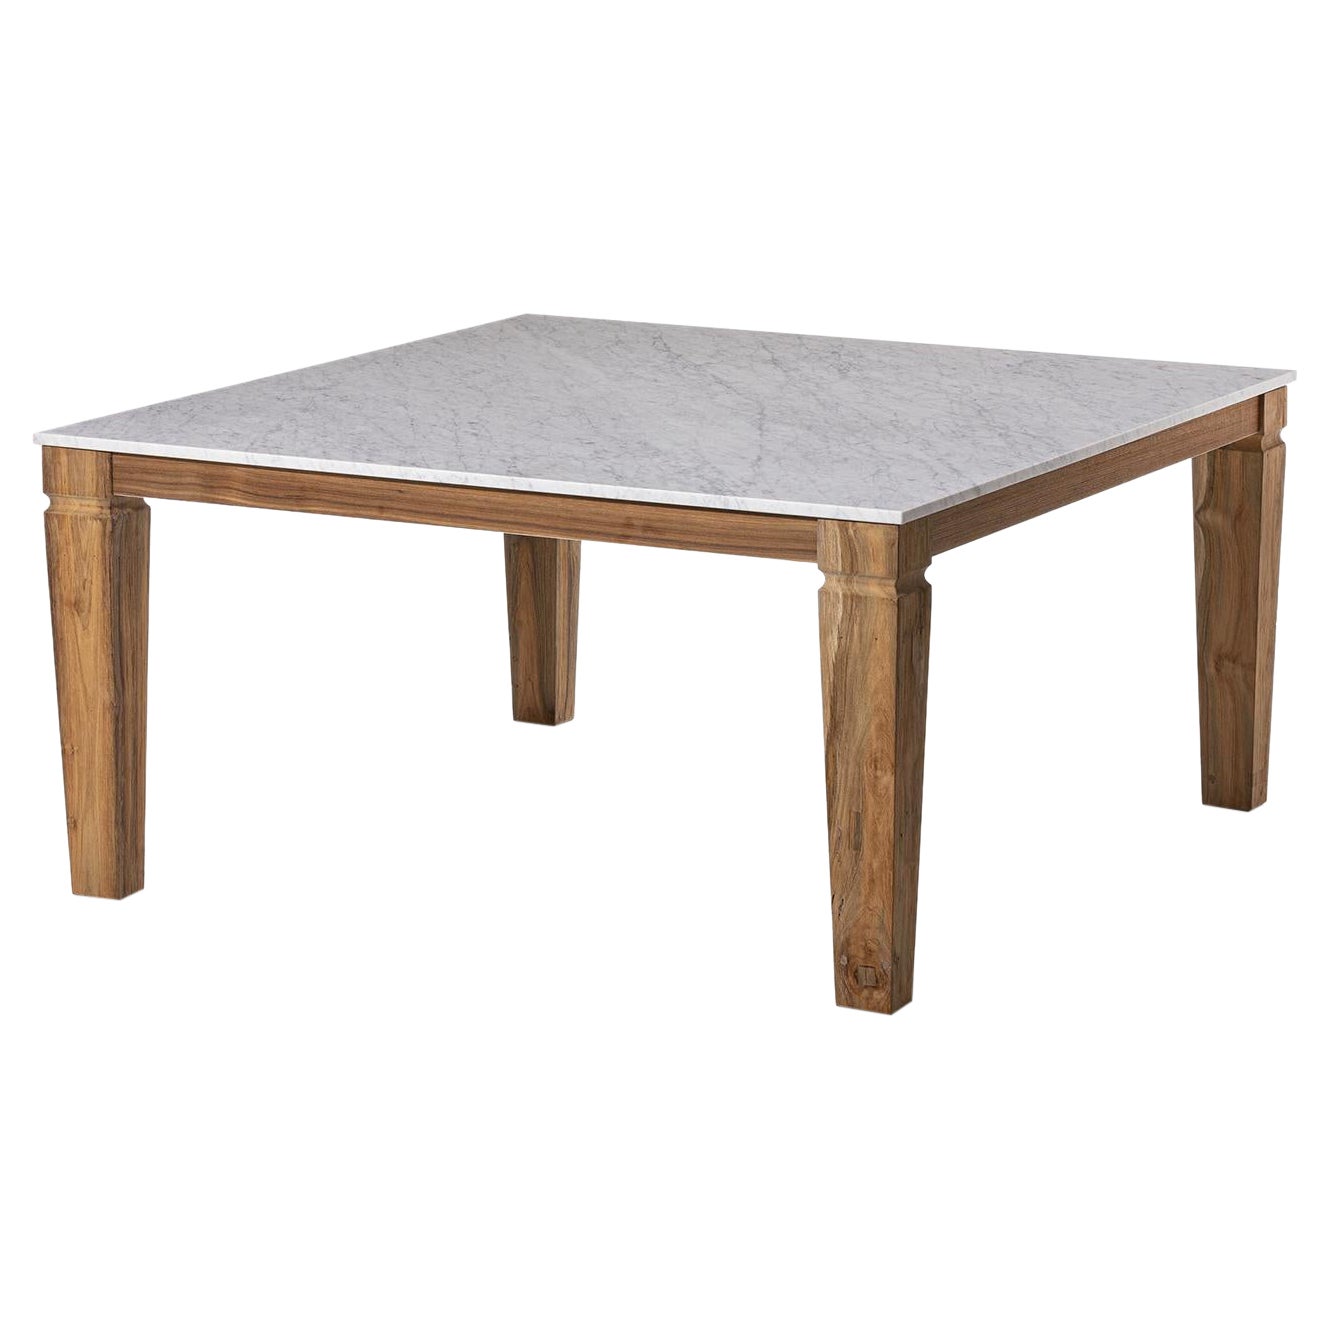 Barletta Square Dining Table For Sale